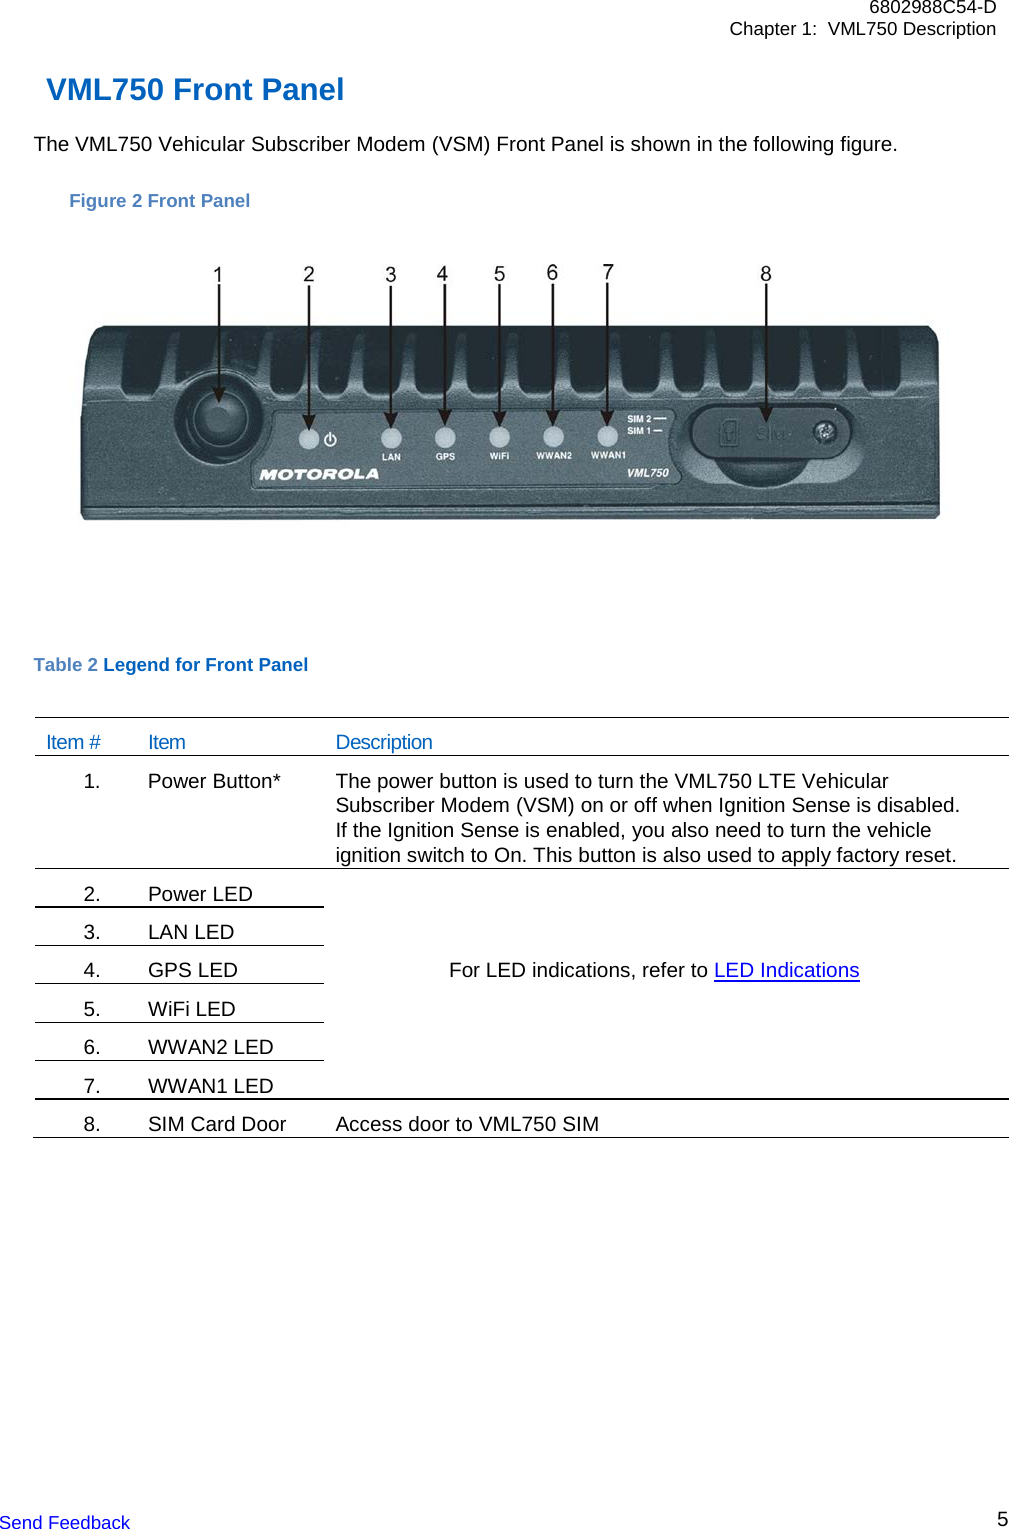 6802988C54-D Chapter 1:  VML750 Description Send Feedback  5   VML750 Front Panel  The VML750 Vehicular Subscriber Modem (VSM) Front Panel is shown in the following figure.      Table 2 Legend for Front Panel  Item # Item Description 1.    Power Button* The power button is used to turn the VML750 LTE Vehicular Subscriber Modem (VSM) on or off when Ignition Sense is disabled. If the Ignition Sense is enabled, you also need to turn the vehicle ignition switch to On. This button is also used to apply factory reset. 2.   Power LED  3.   LAN LED  4.   GPS LED For LED indications, refer to LED Indications 5.   WiFi LED  6.   WWAN2 LED  7.   WWAN1 LED  8.   SIM Card Door Access door to VML750 SIM  Figure 2 Front Panel 